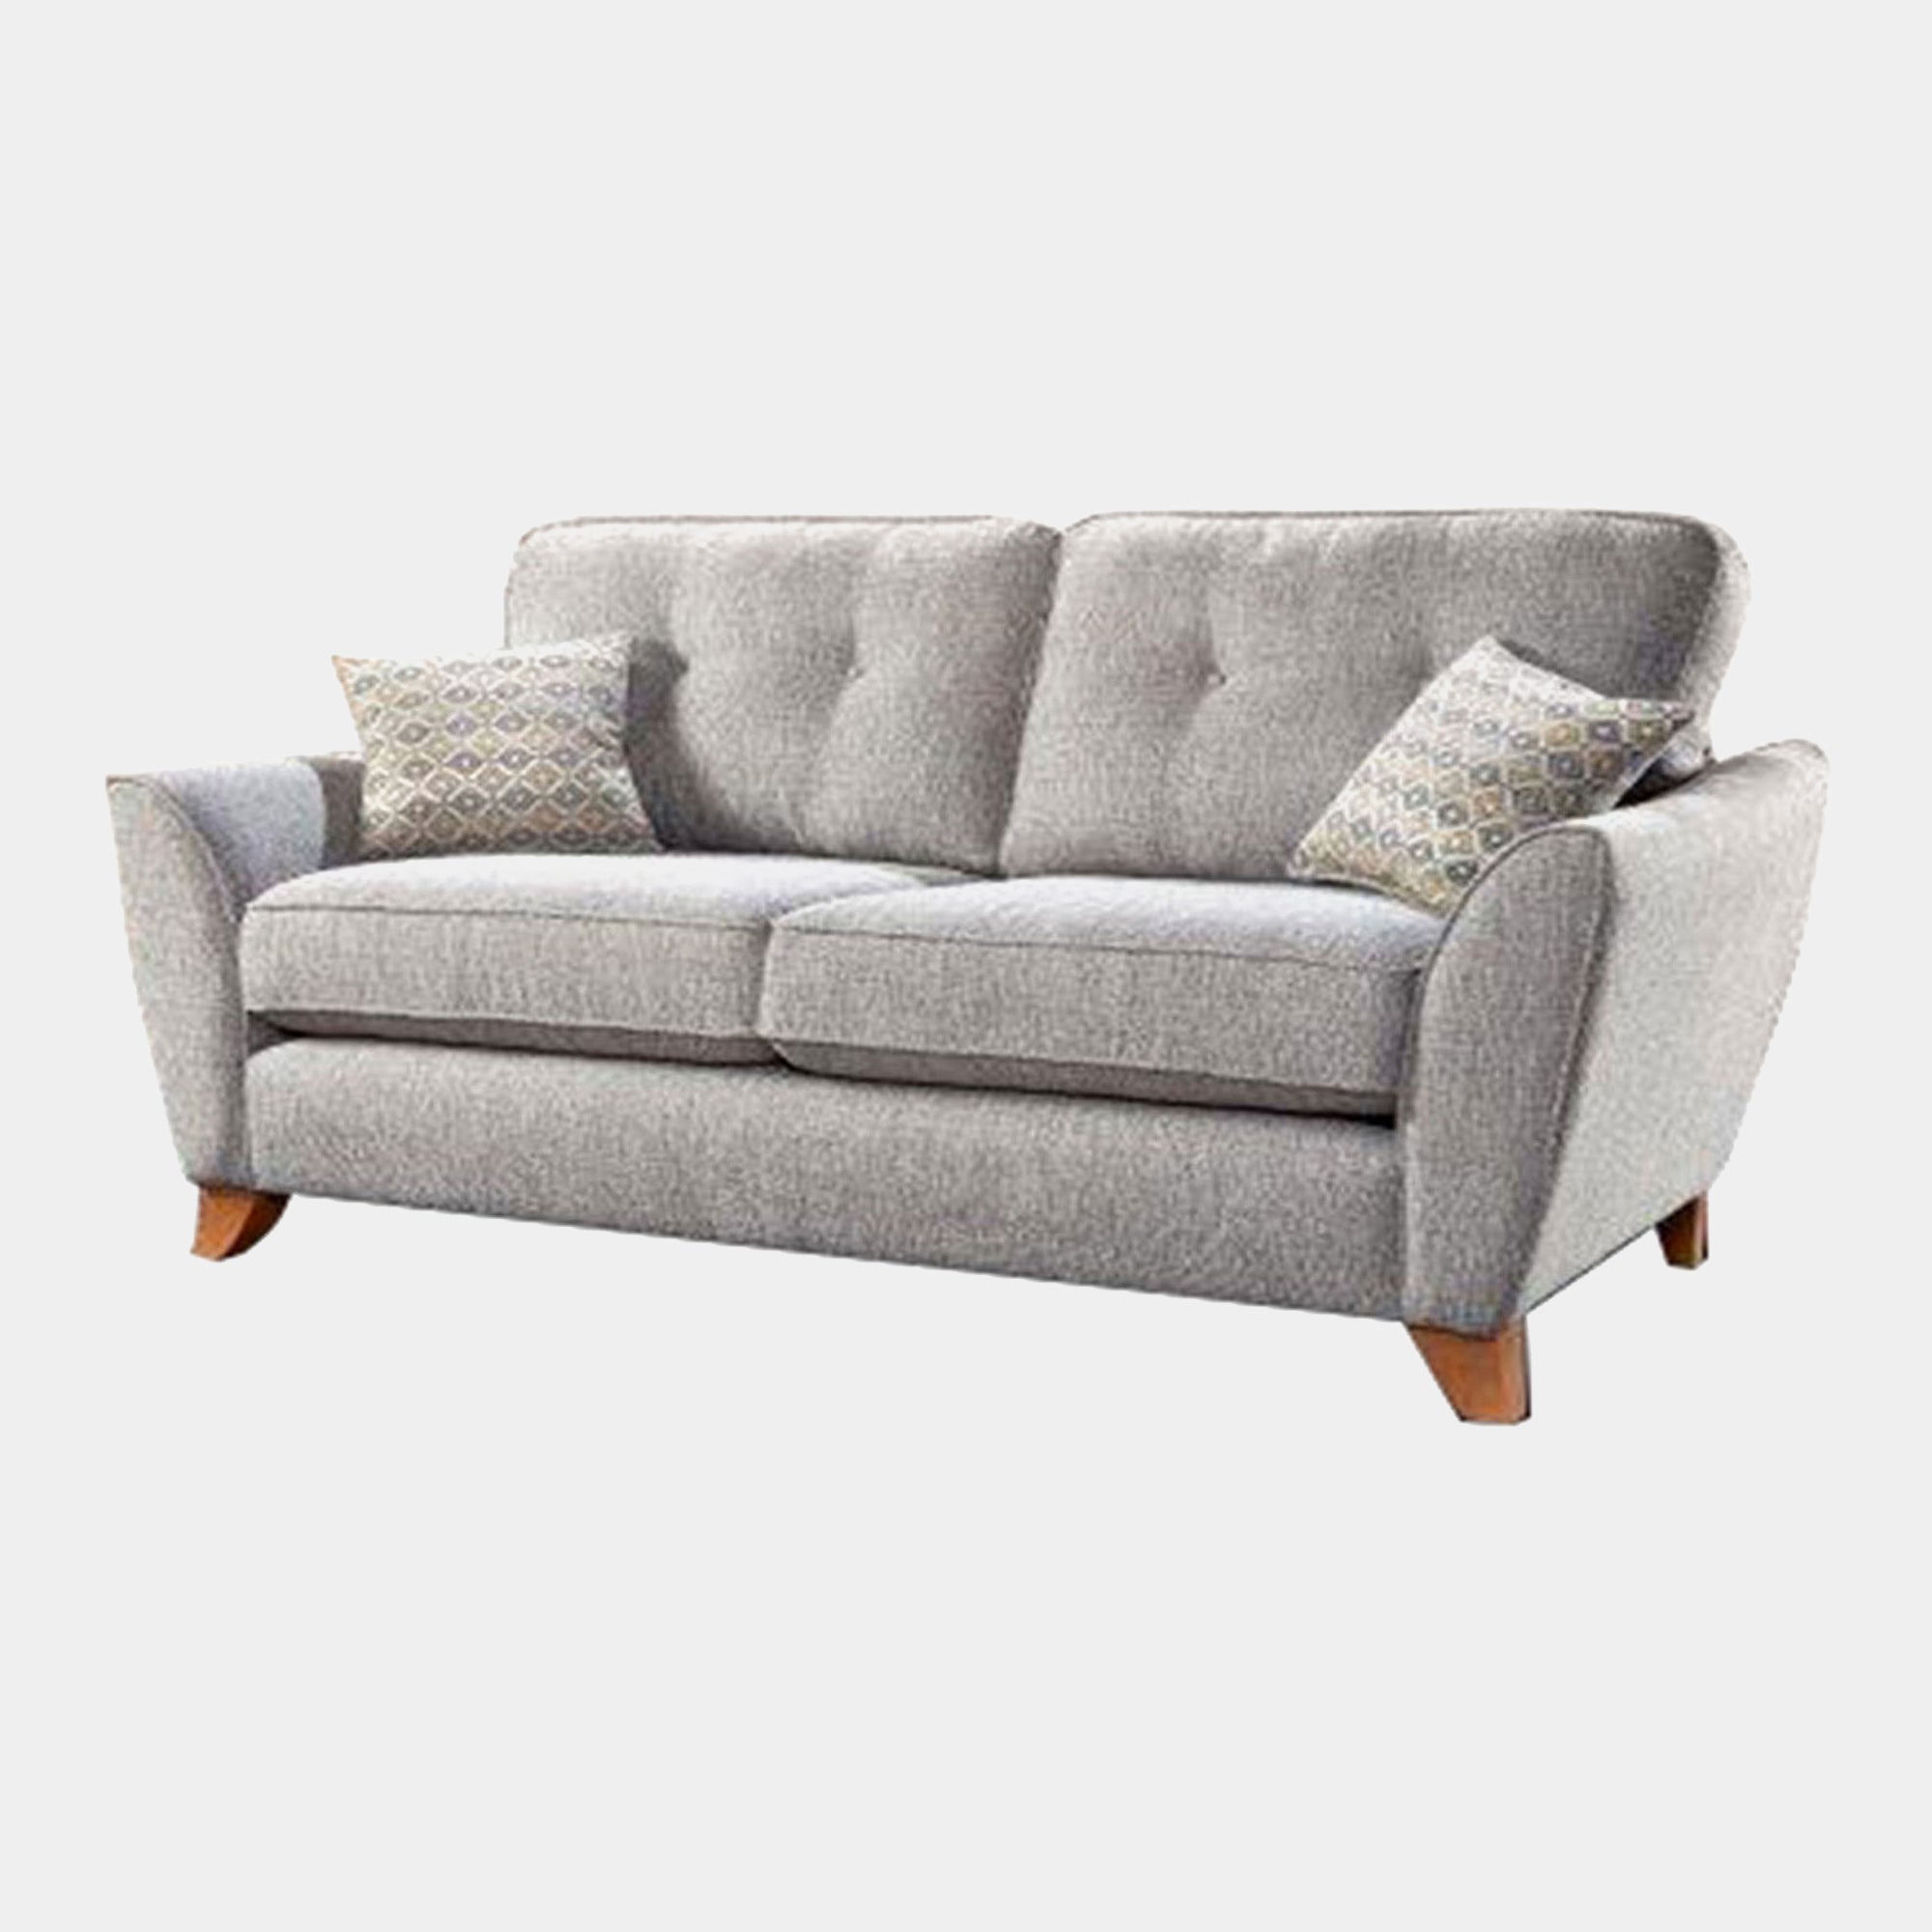 Isabelle - 3 Seat Sofa